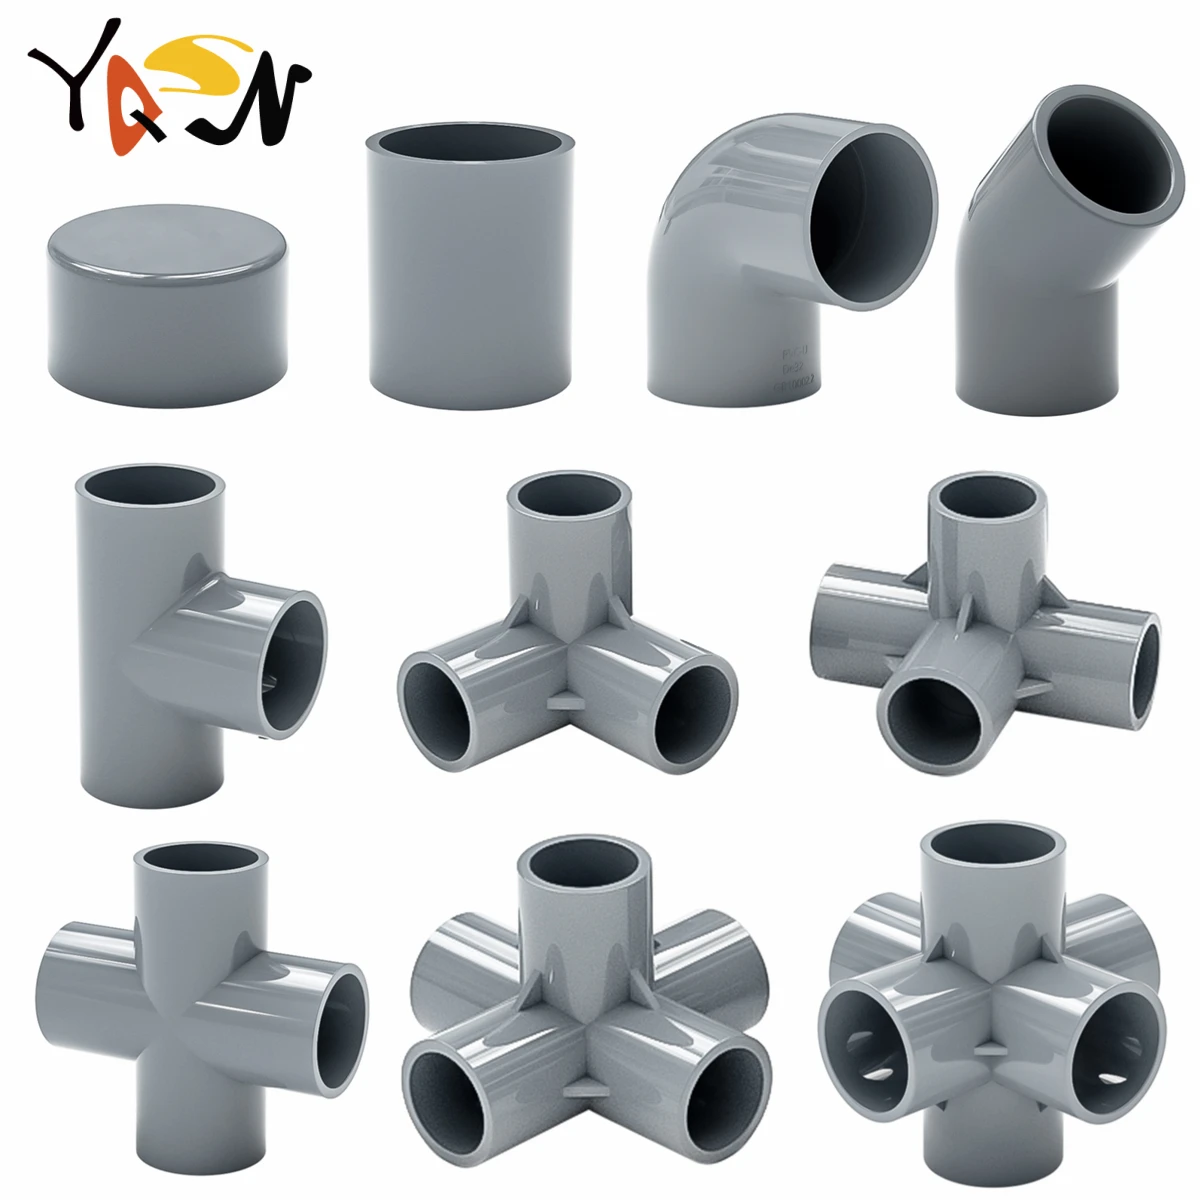 

Gray 20/25/32mm PVC Pipe Fittings 3/4/5/6 Ways DIY Straight Elbow Equal Tee Connectors Plastic Joint Tube Coupler Adapter